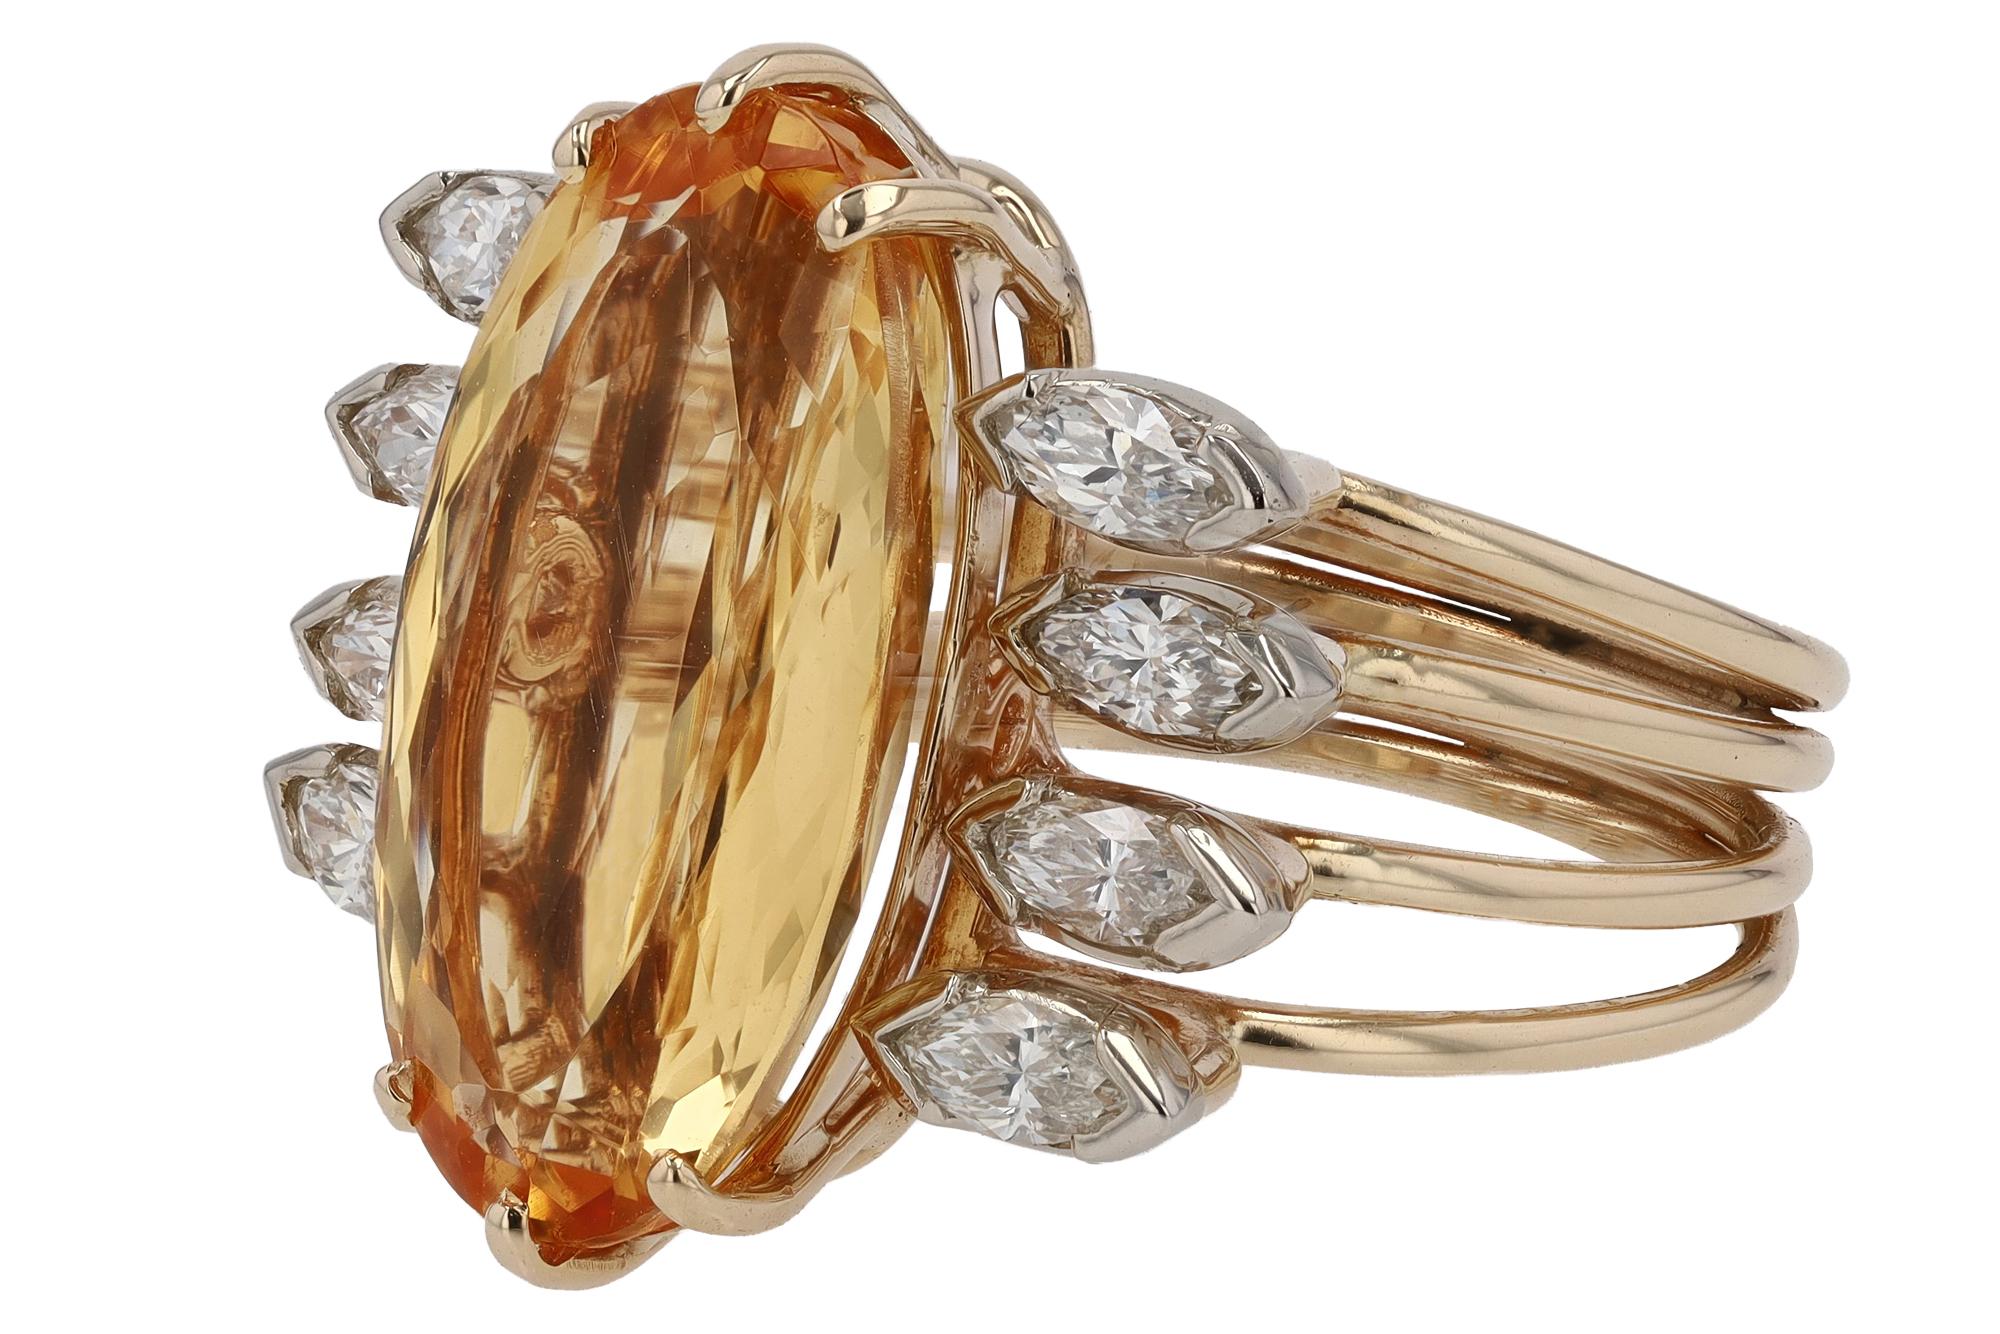 Retro Vintage 8 Carat Imperial Topaz and Diamond Cocktail Ring For Sale